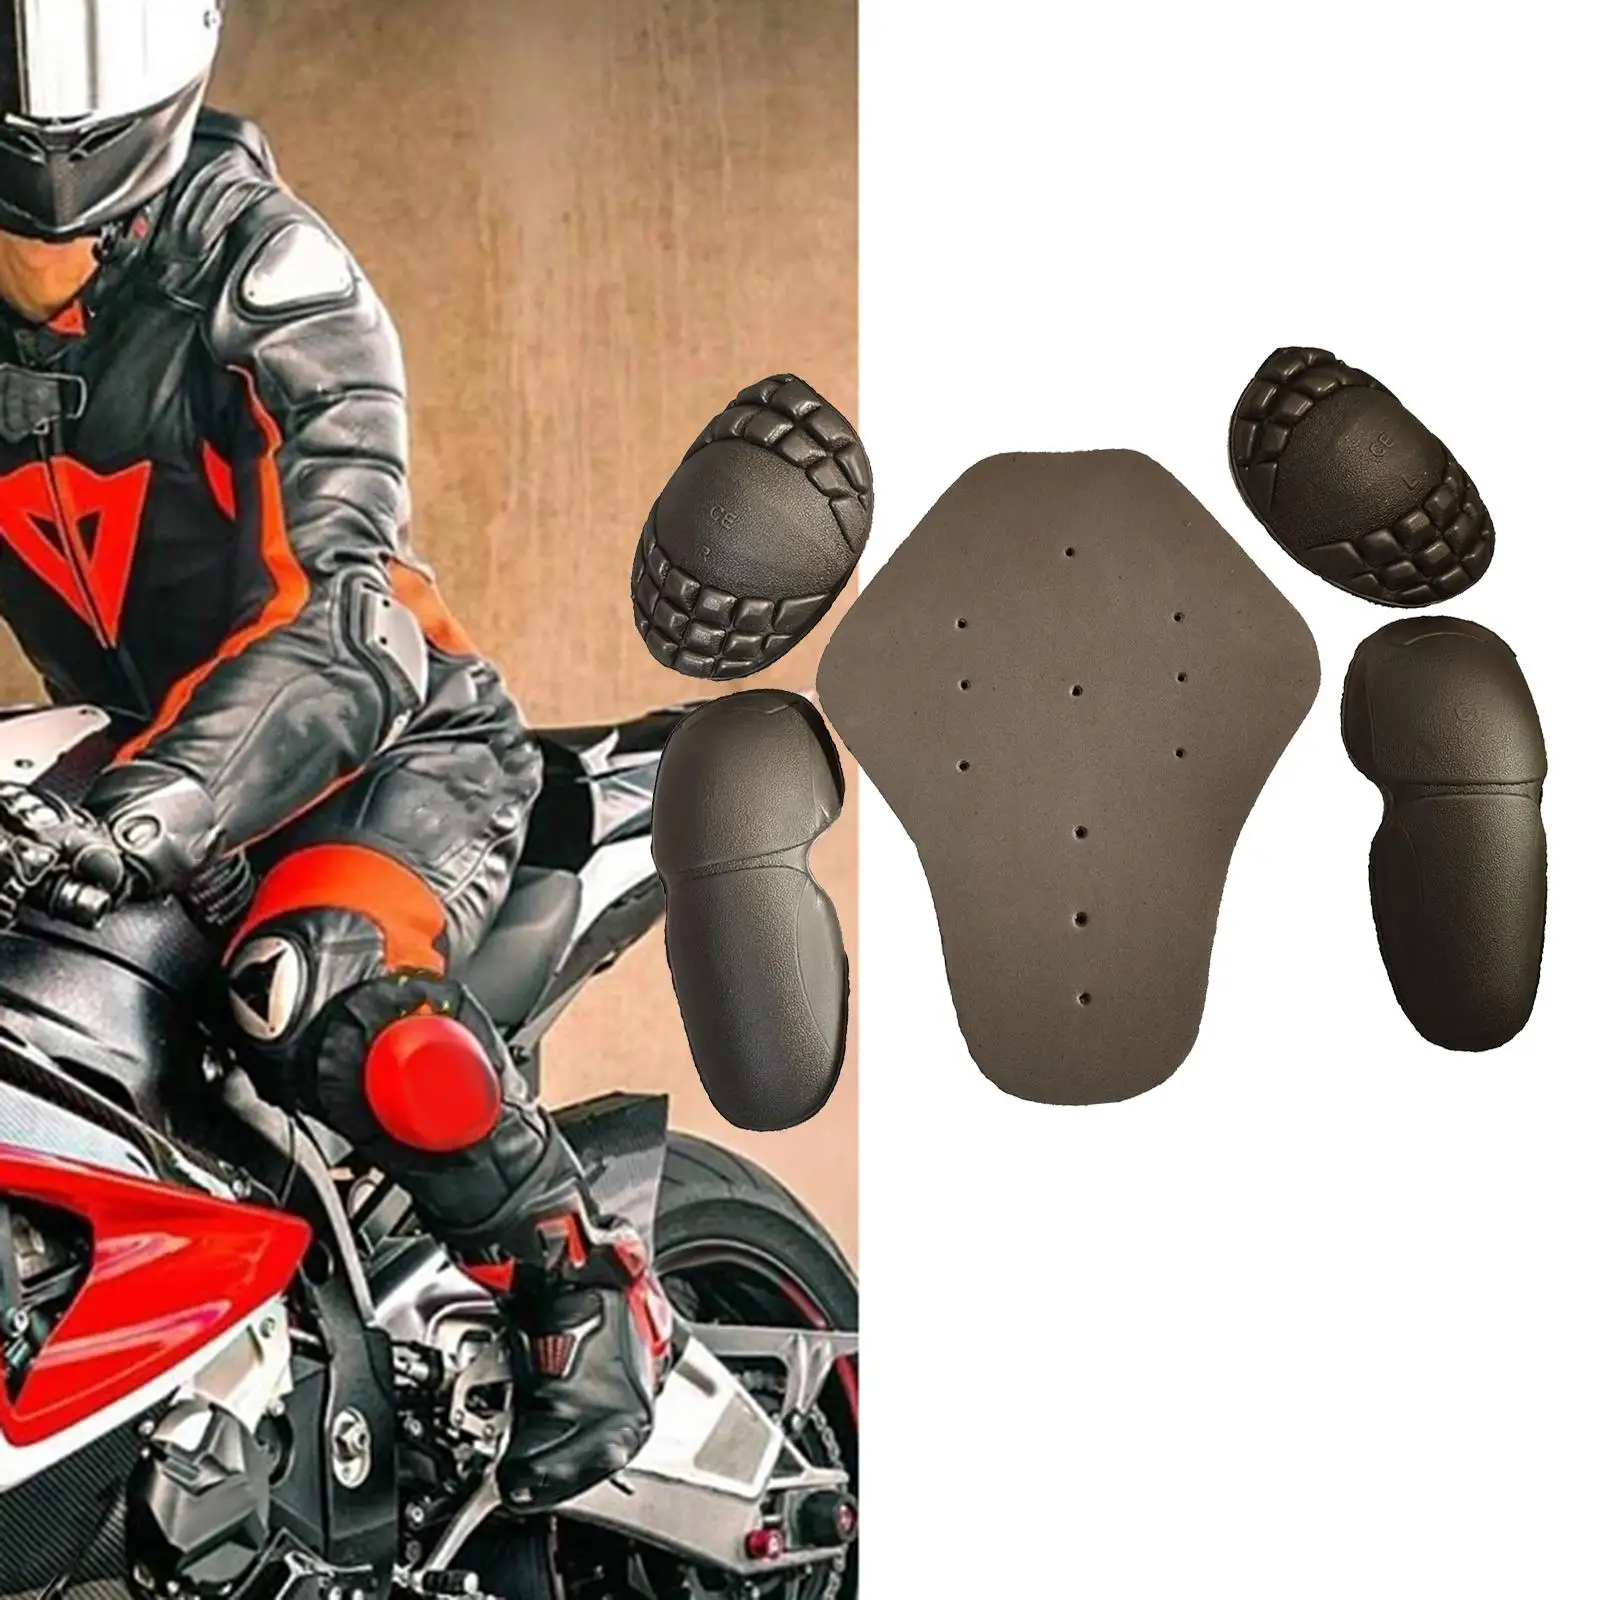 5x Motorbike Body Protective Gear EVA Detachable Insert Protector Set Motorbike Protection Pad for Motocross Sport Adults